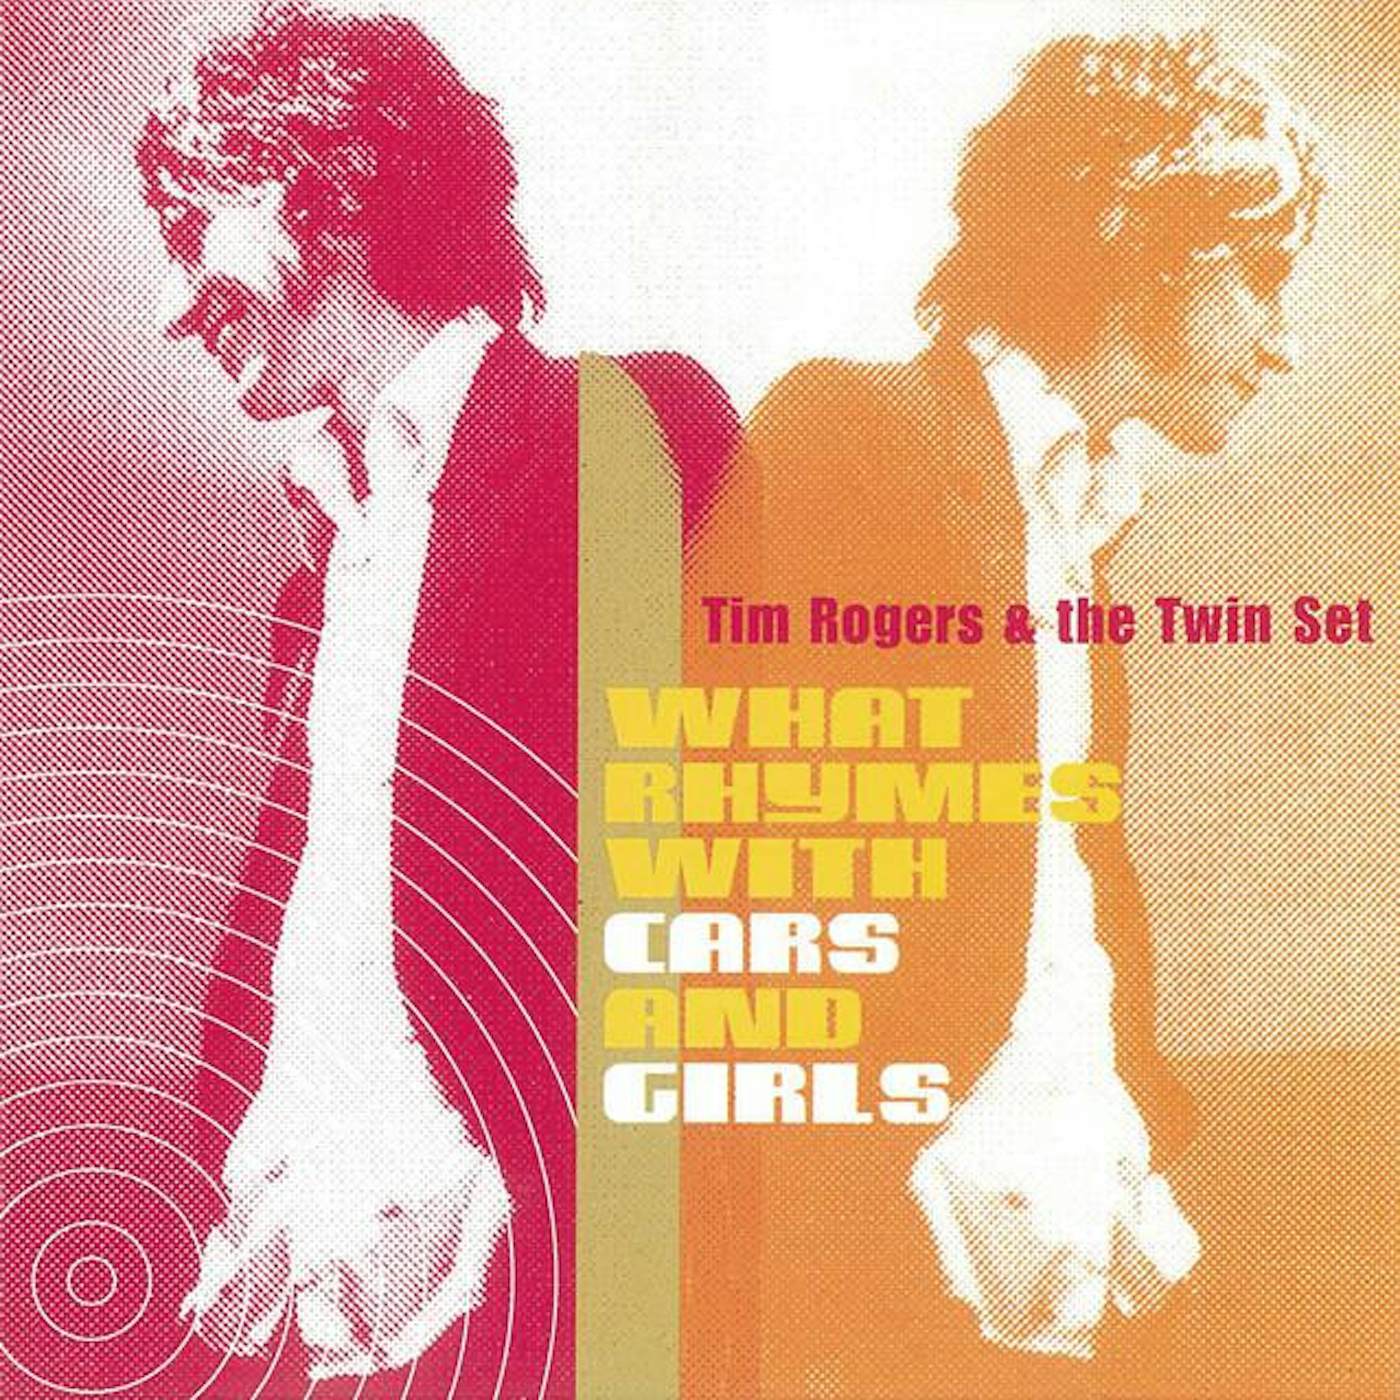 Tim Rogers & The Twin Set